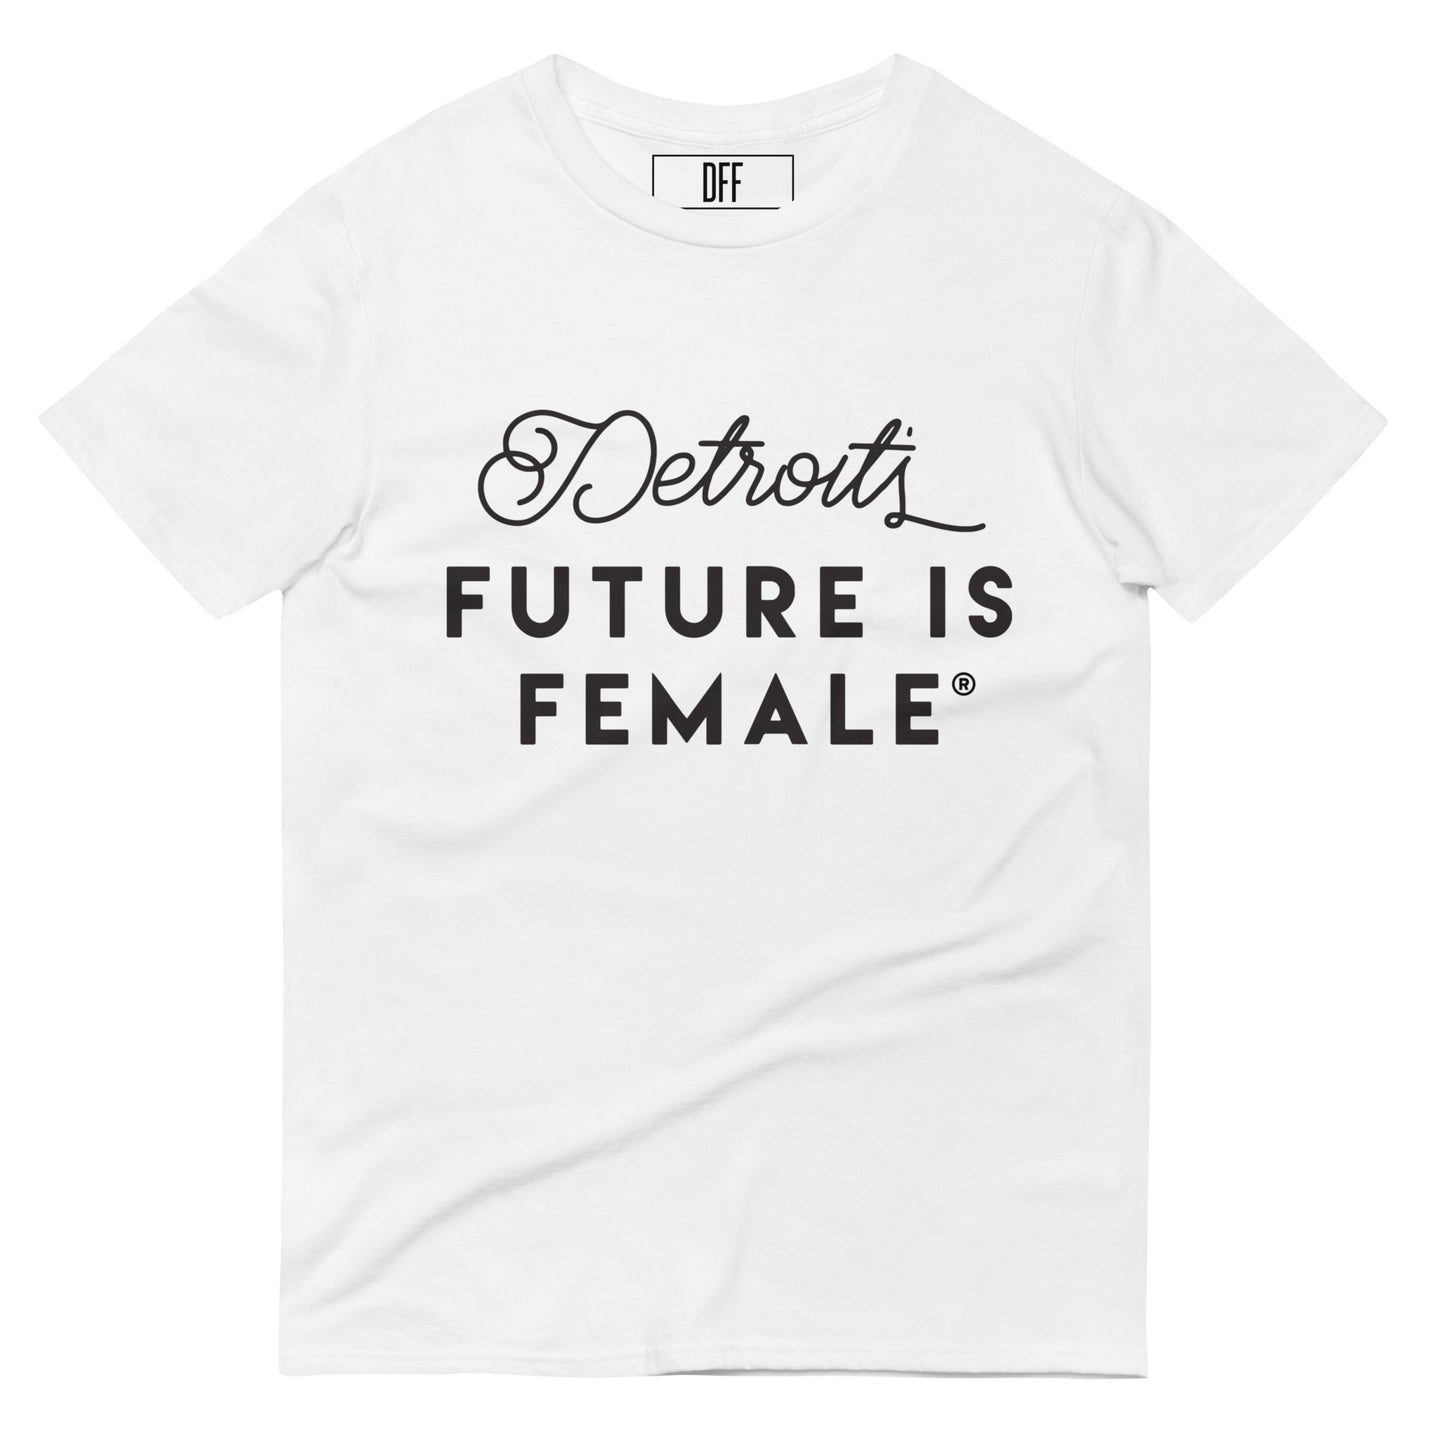 [INSERT YOUR CITY] FUTURE IS FEMALE Short-Sleeve T-Shirt